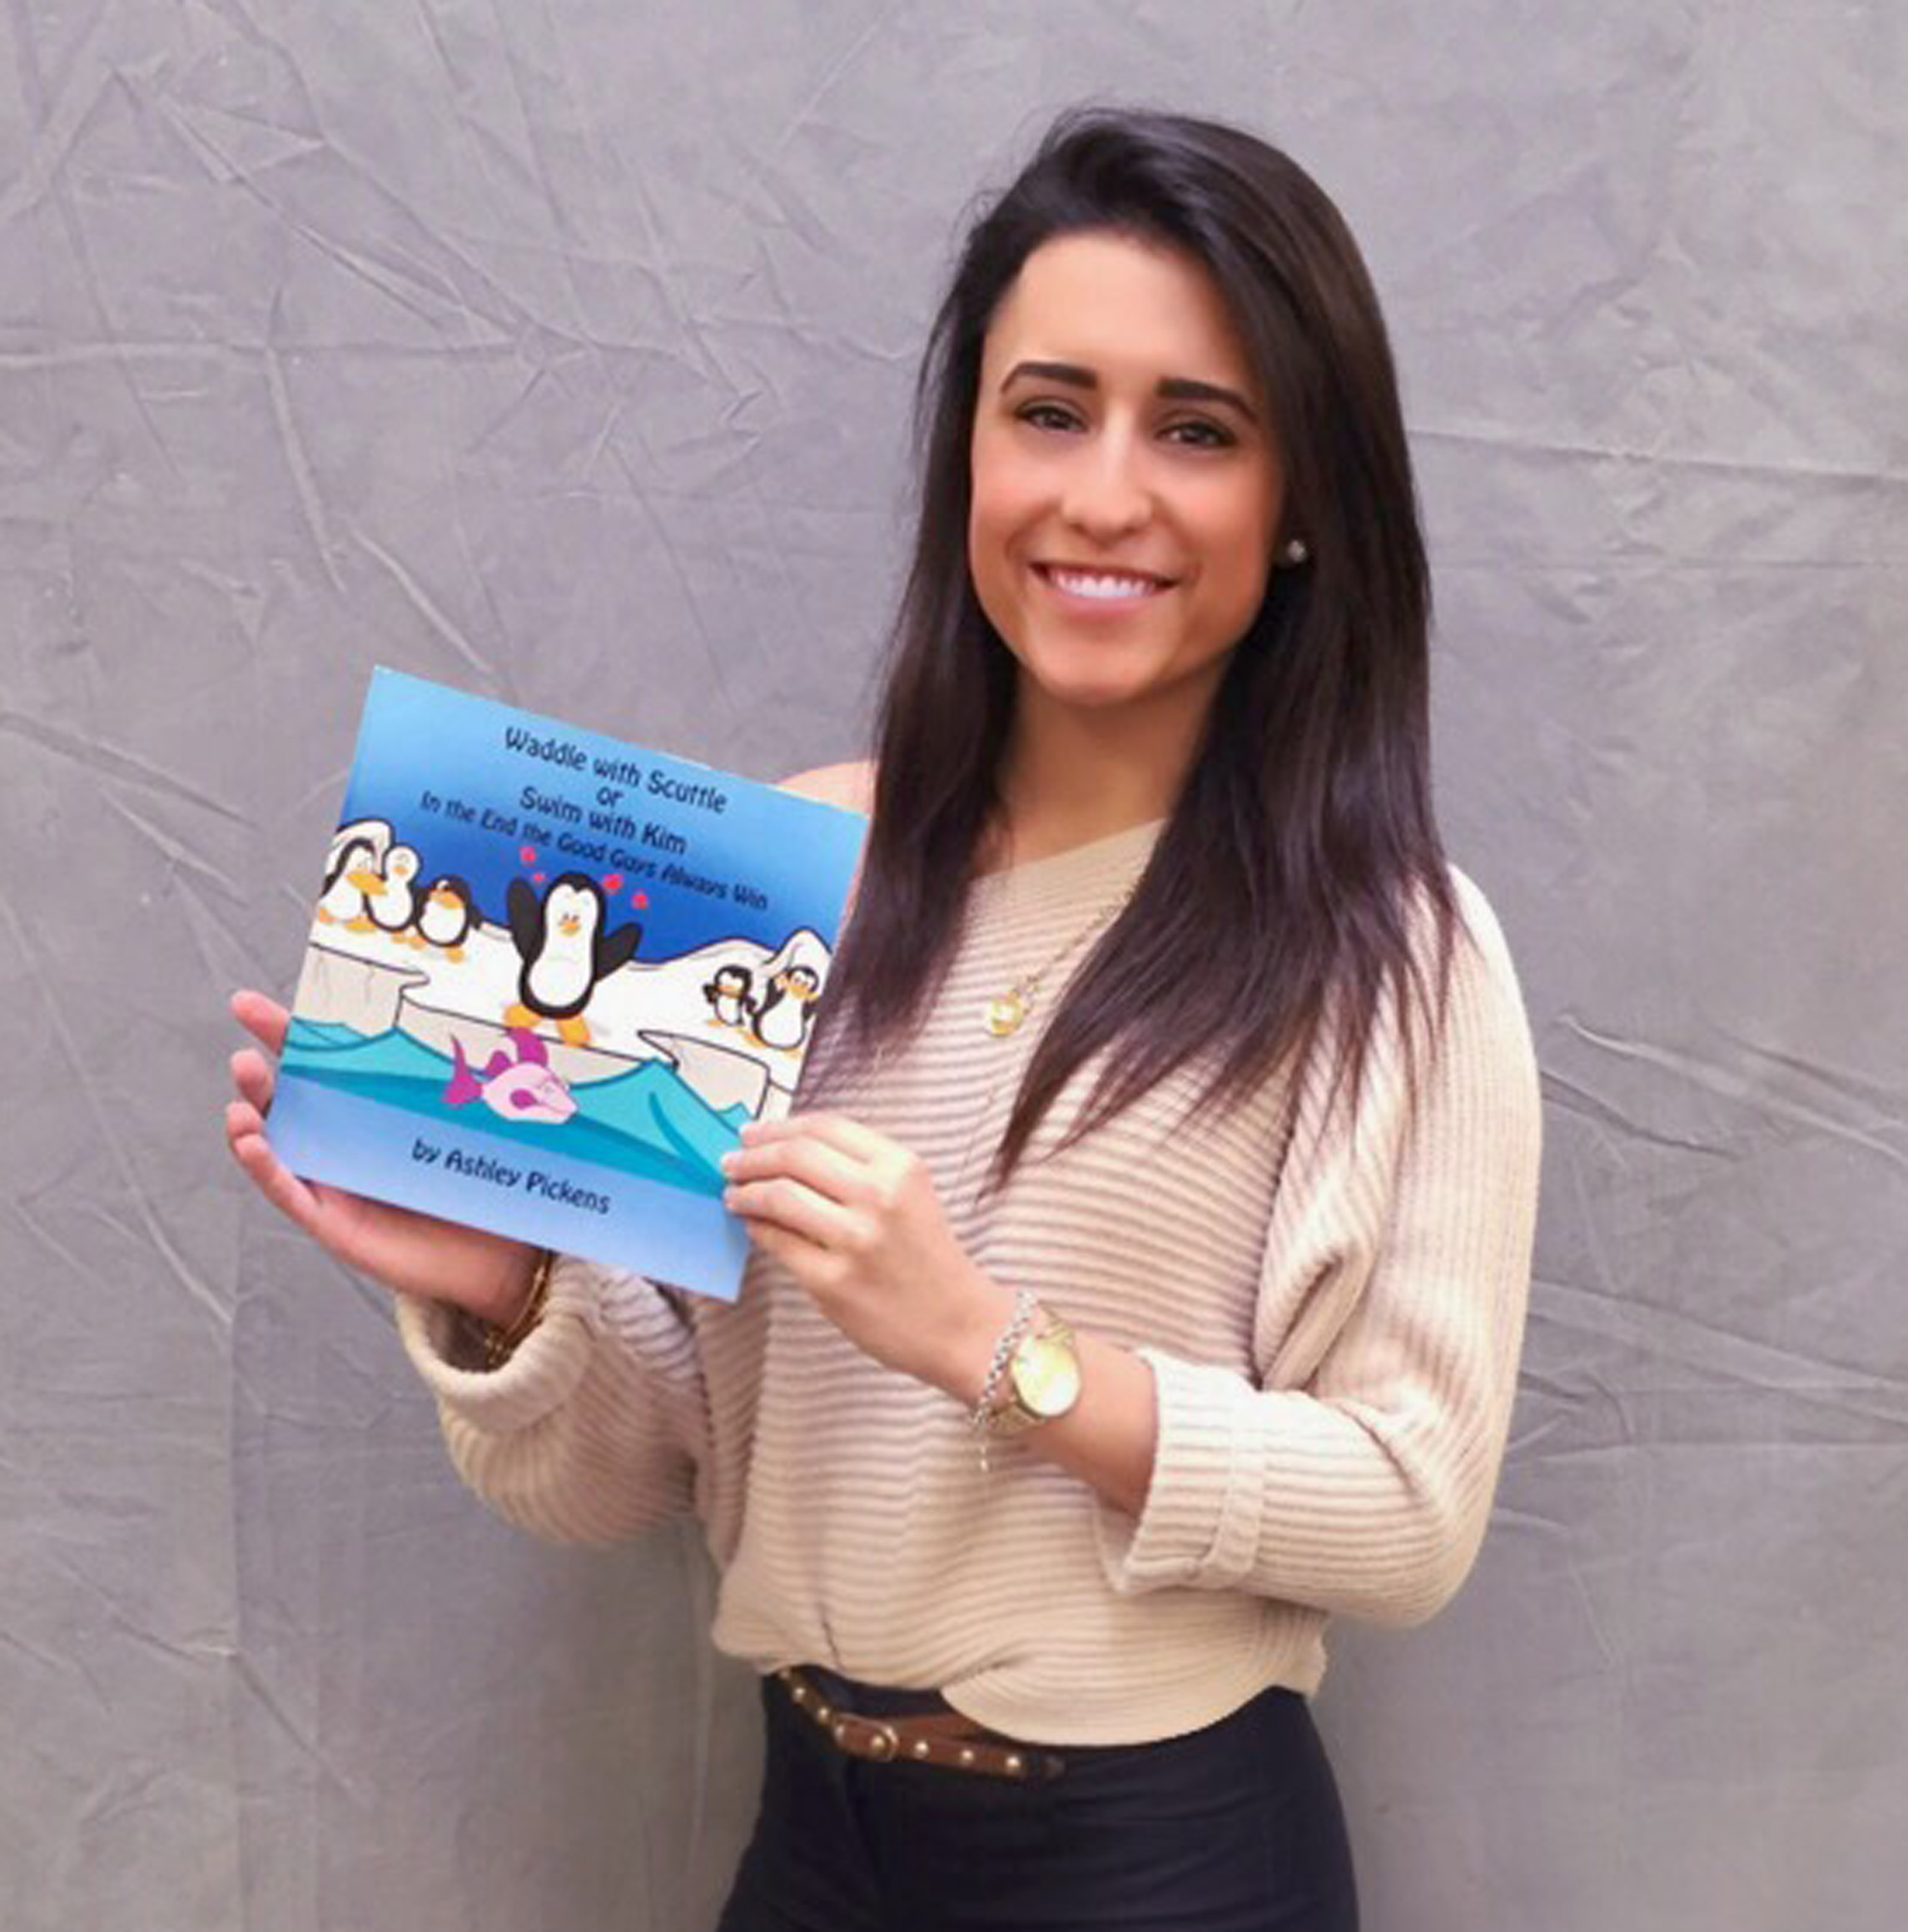 Children's author Ashley Pickens with her new illustrated book